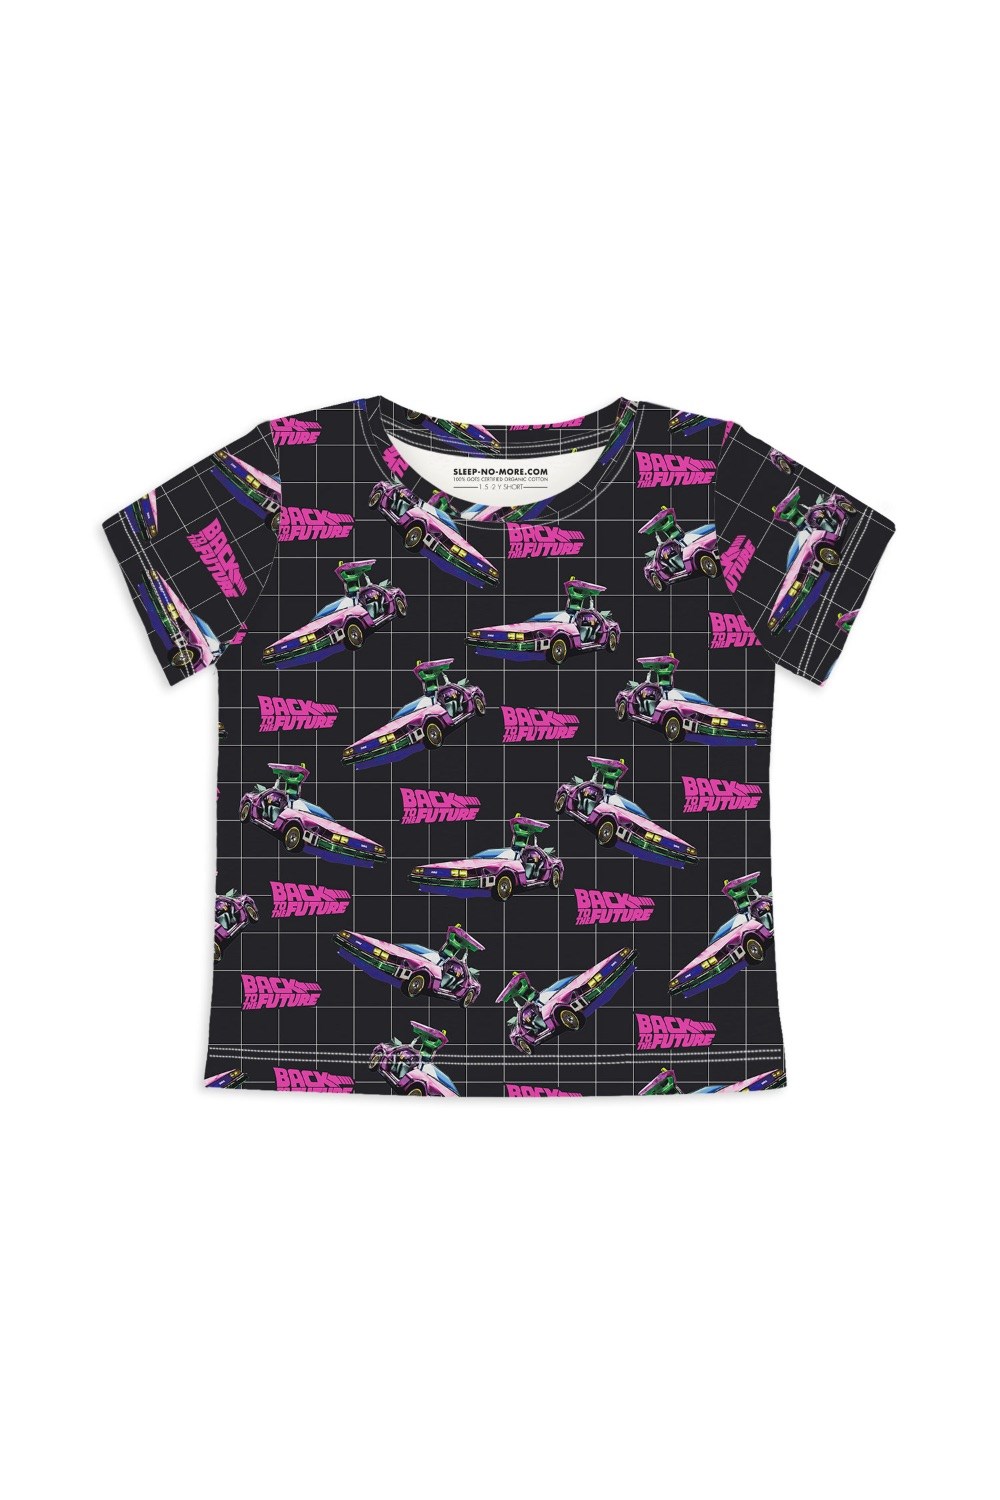 Back To The Future 03 Toddler T-shirt -